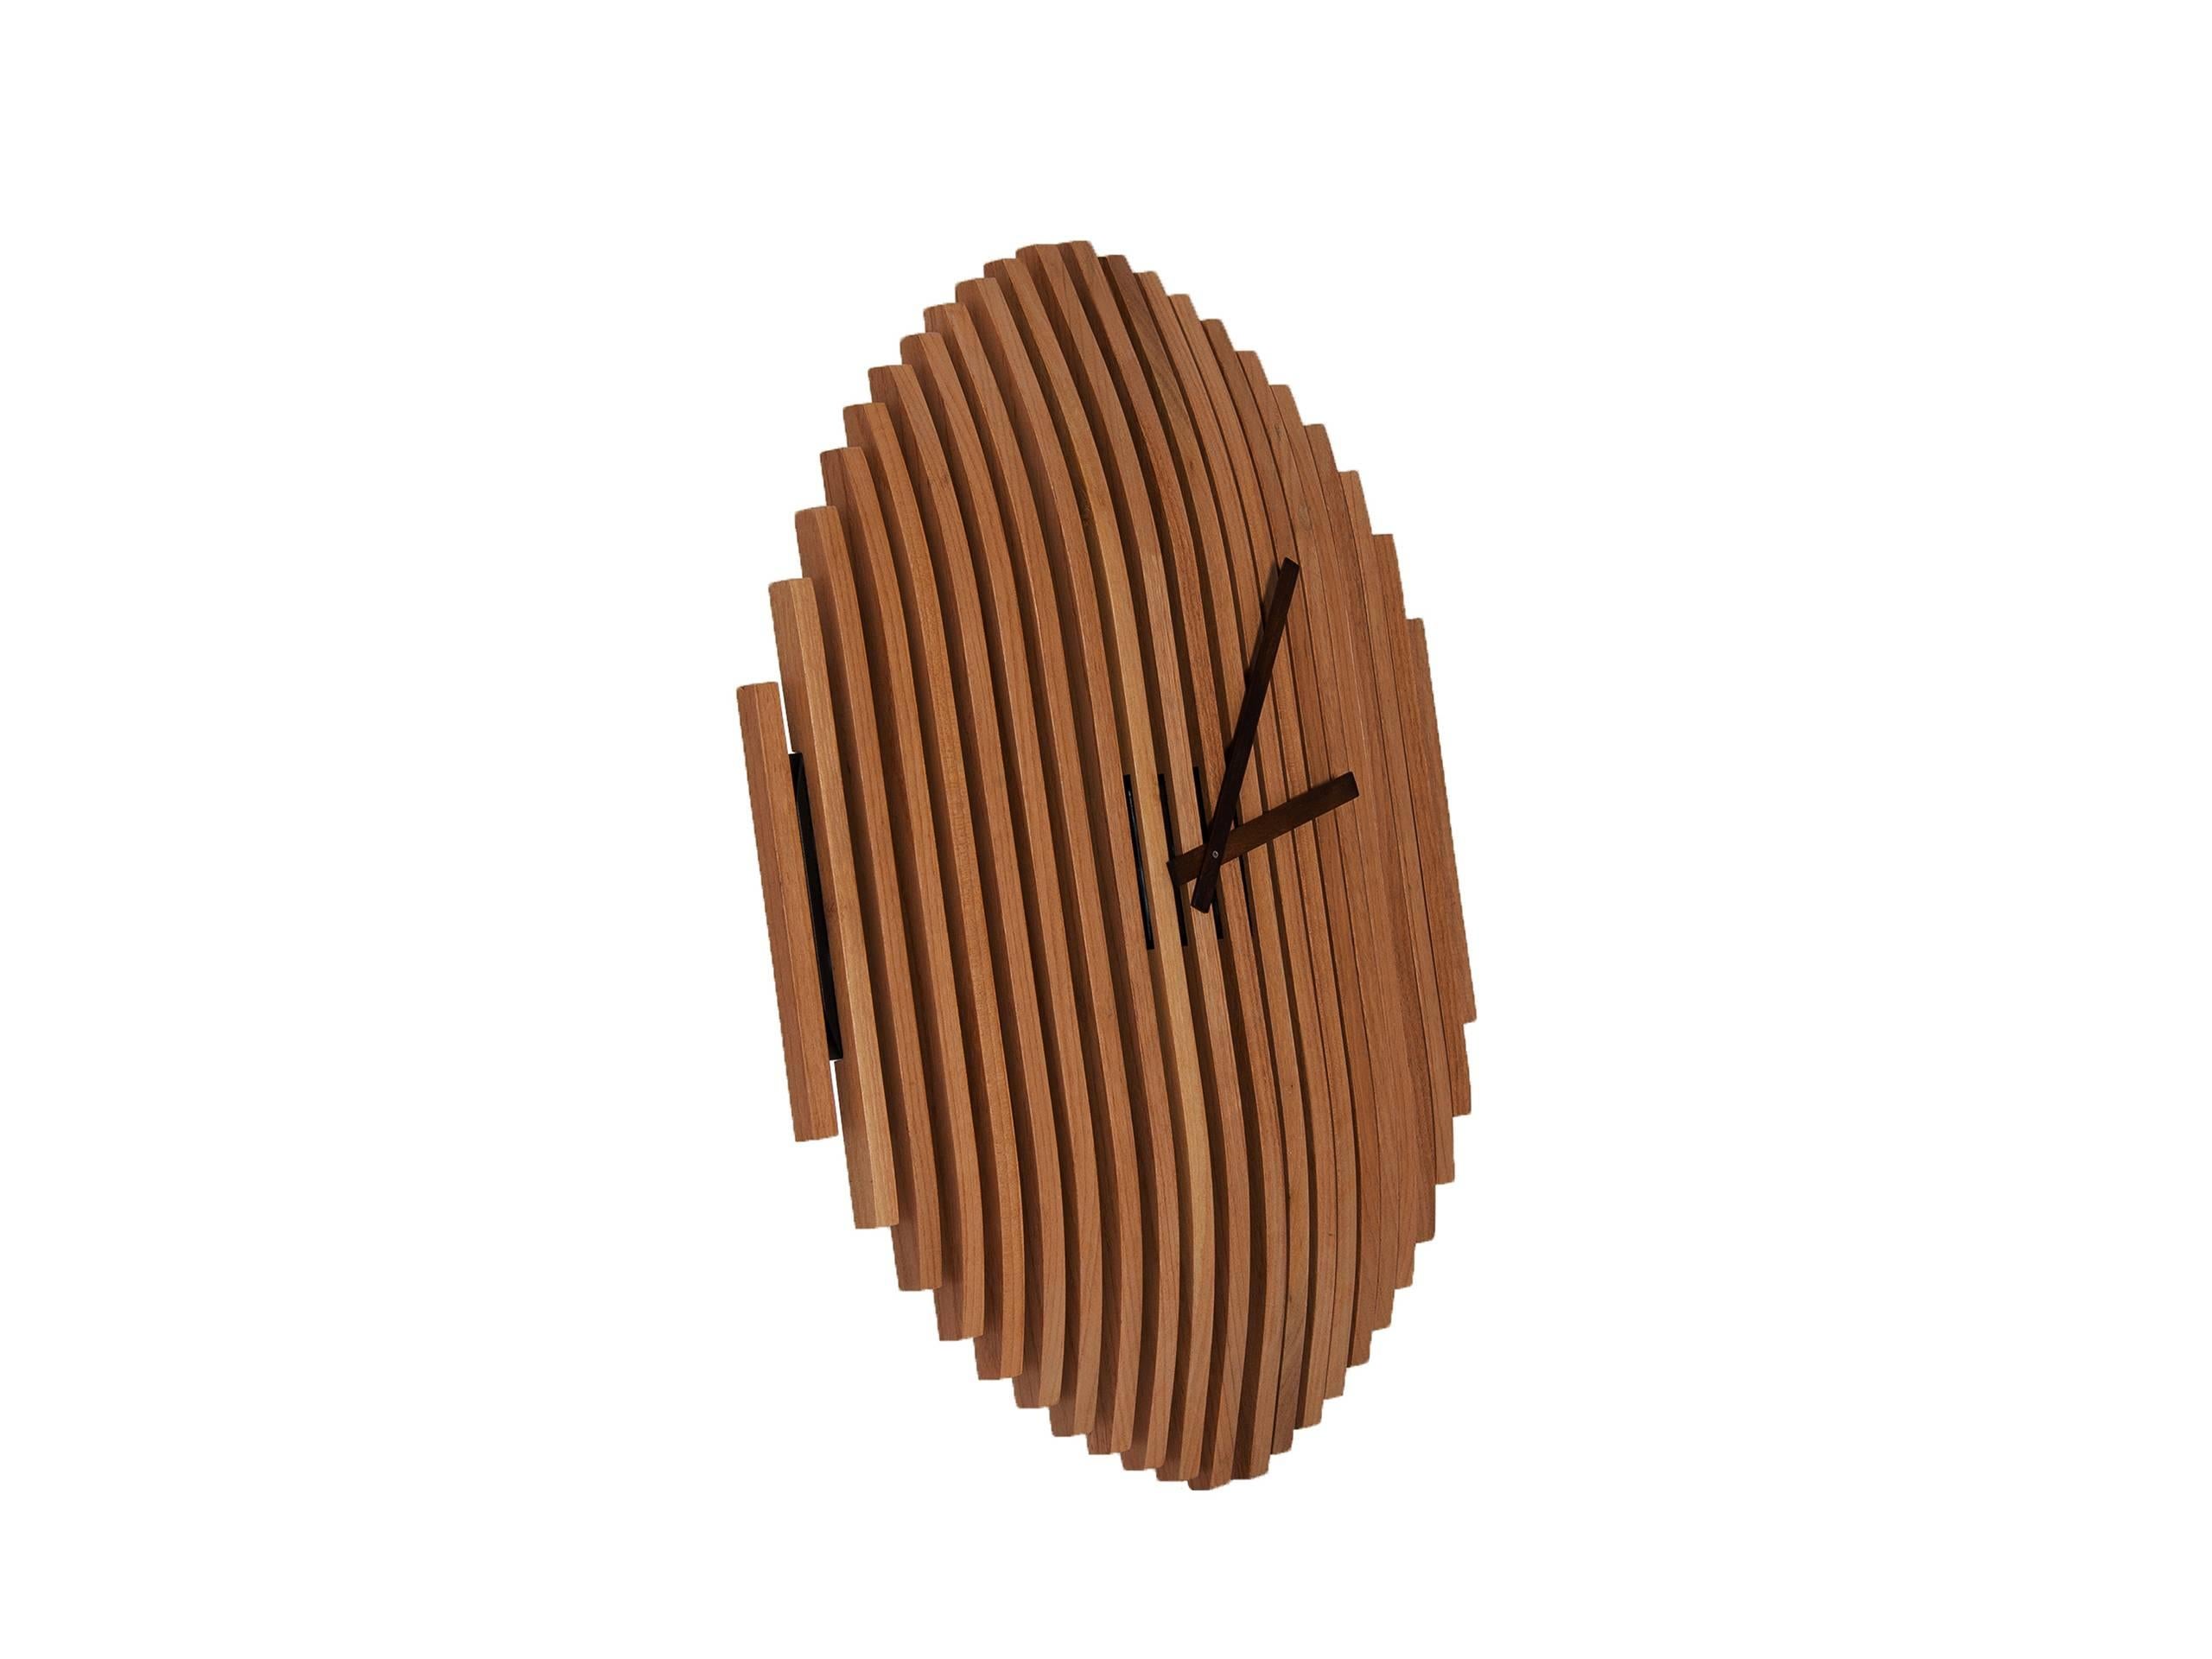 This series of wall clocks gets its inspiration from Aztec aesthetics and culture. The Aztecs were knowledgeable about time span and had calculated with precision the year’s duration, determined the solstices, the phases of the moon and located